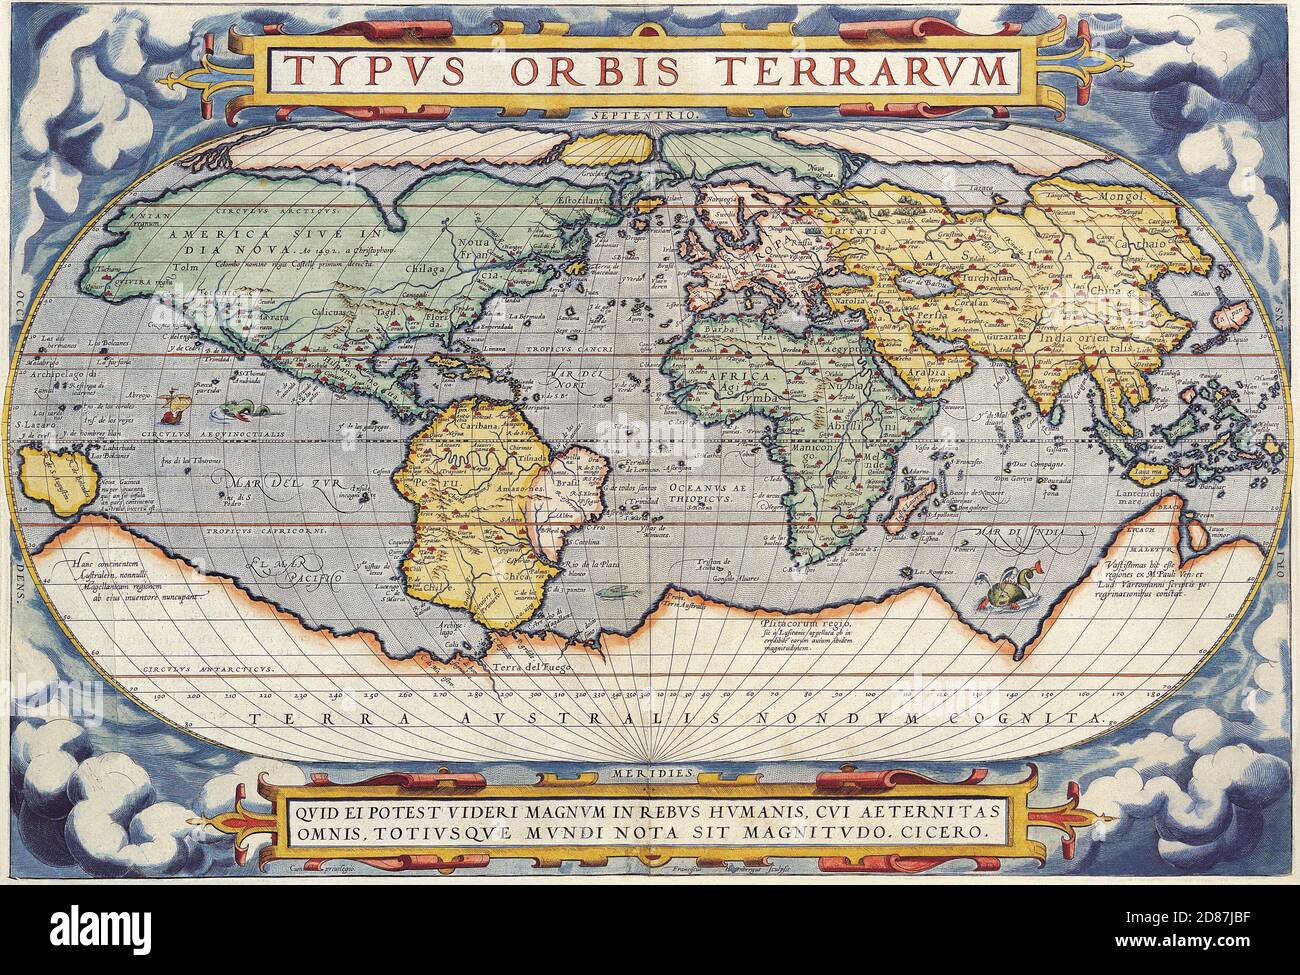 Type Orbis Terrarum (16th century). Illustrated old map of the World, vintage style full of details. Stock Photo